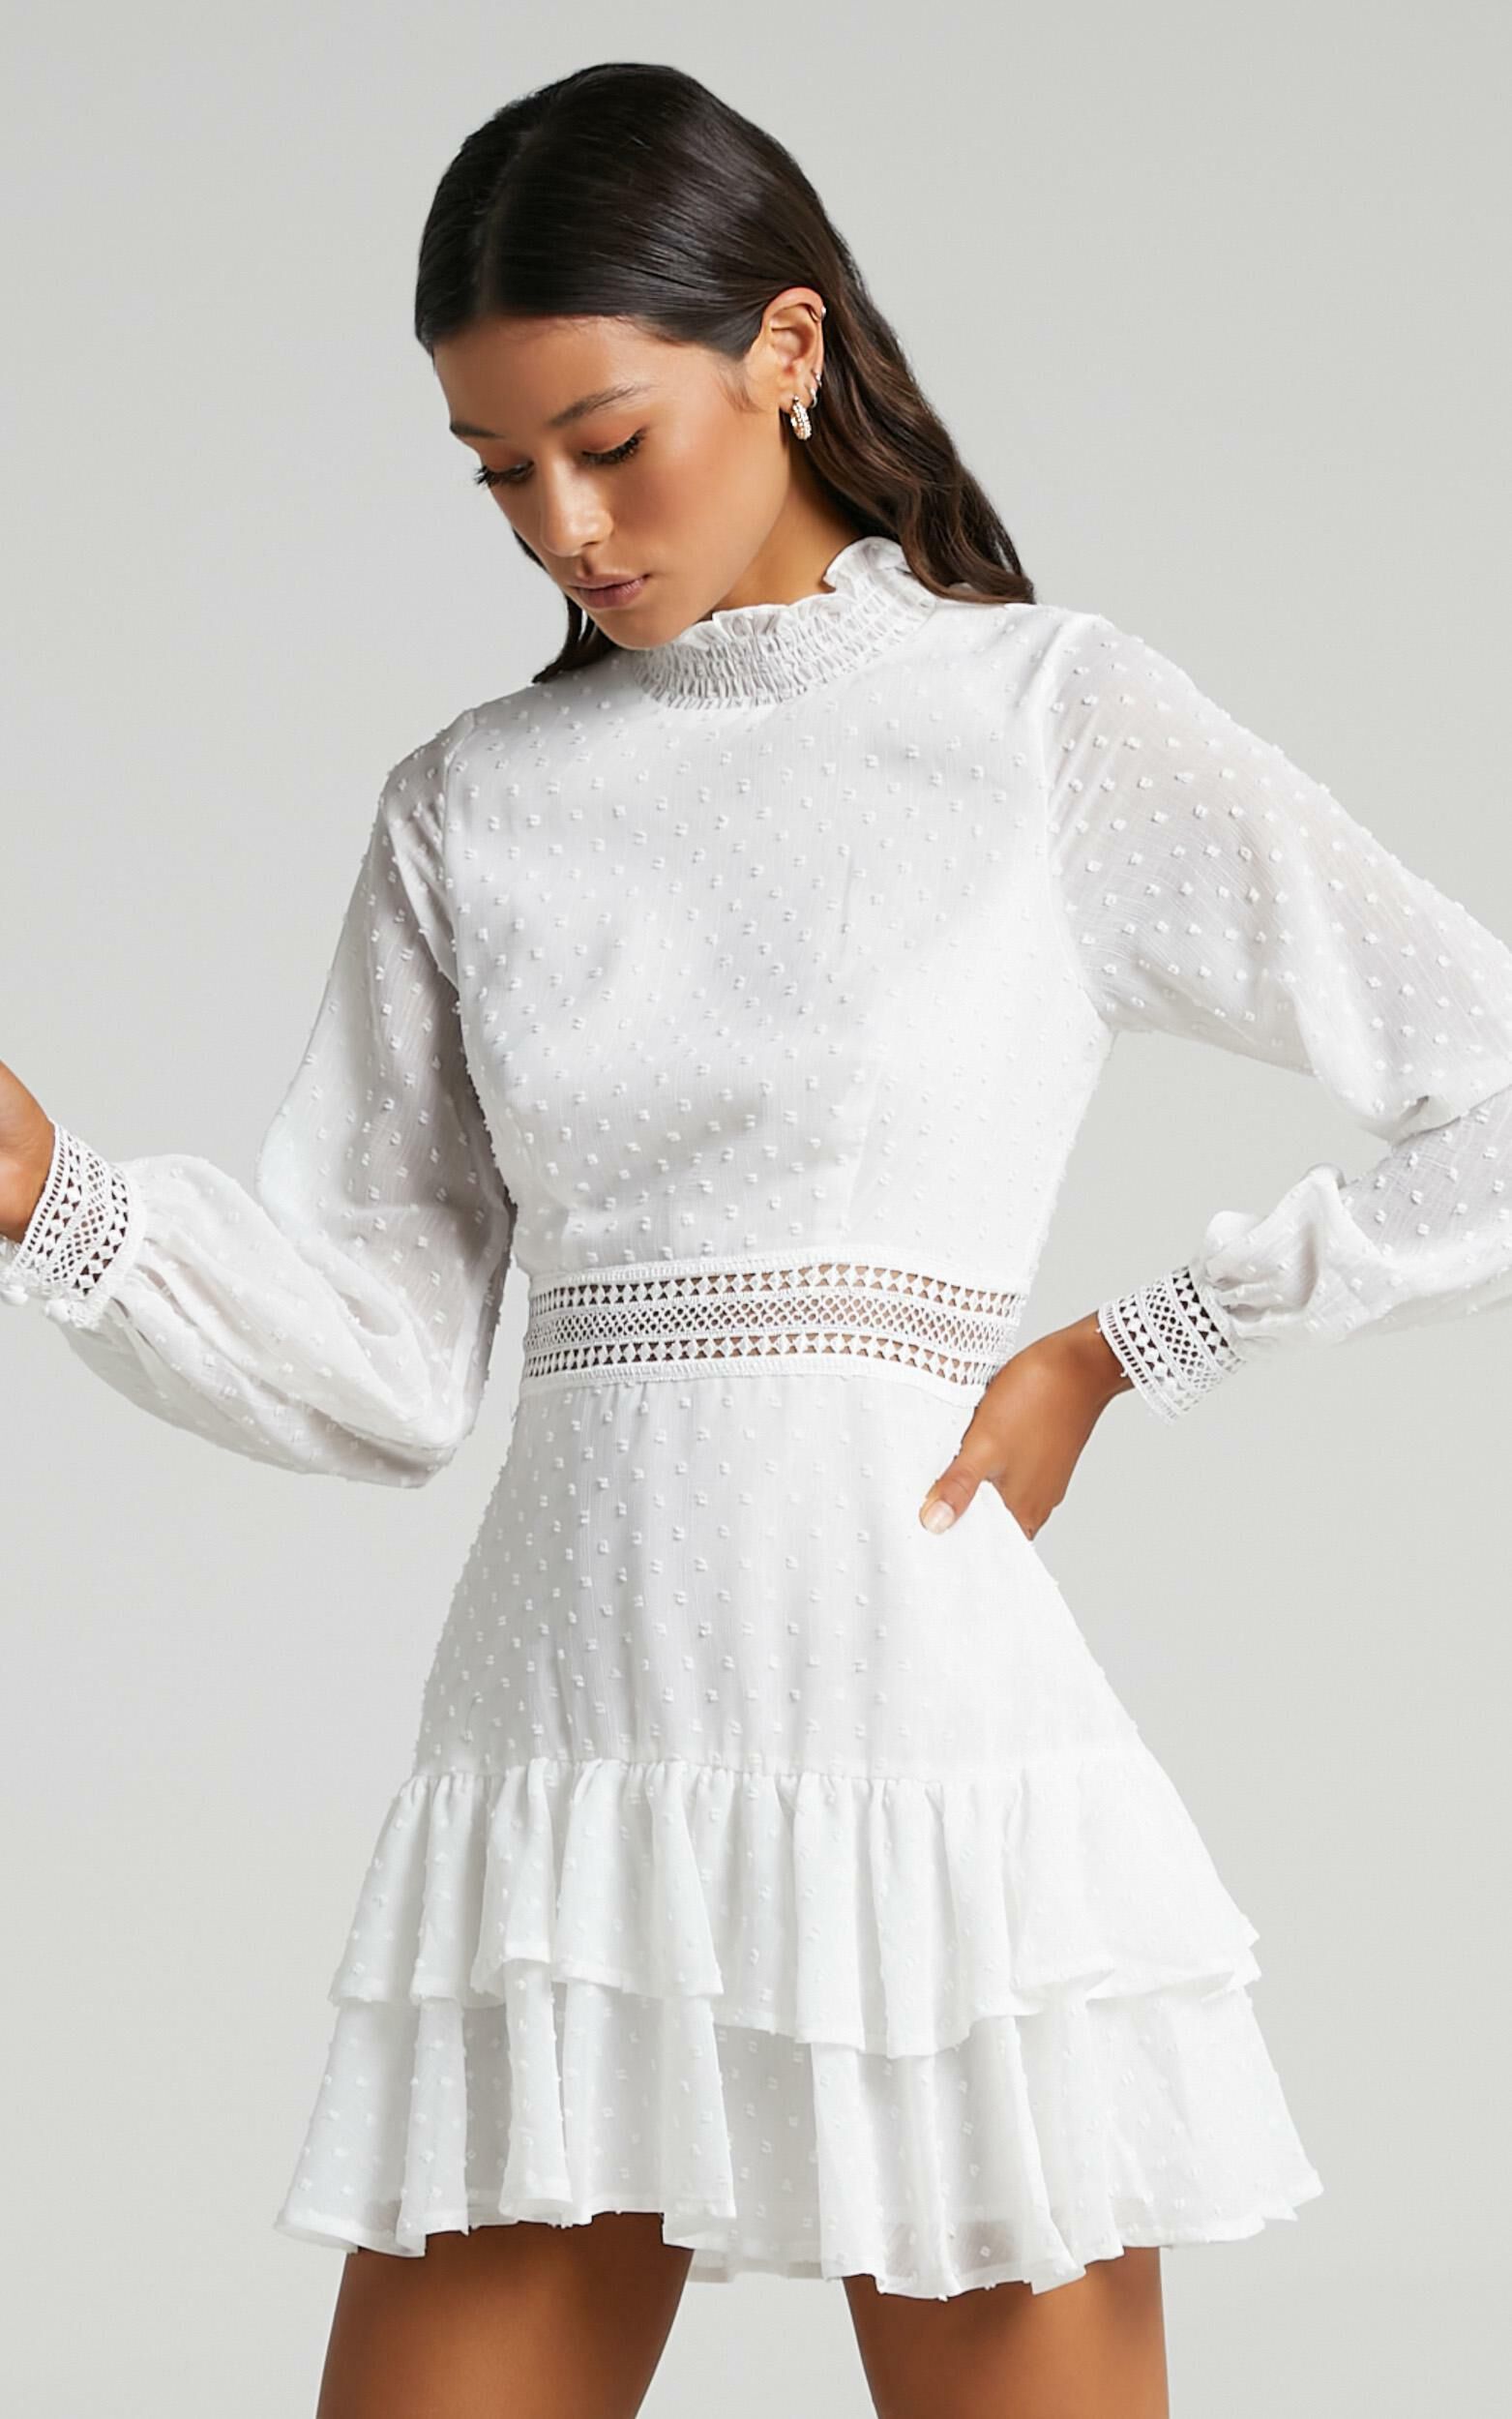 Are You Gonna Kiss Me Long Sleeve Mini Dress in White - 04, WHT1, super-hi-res image number null